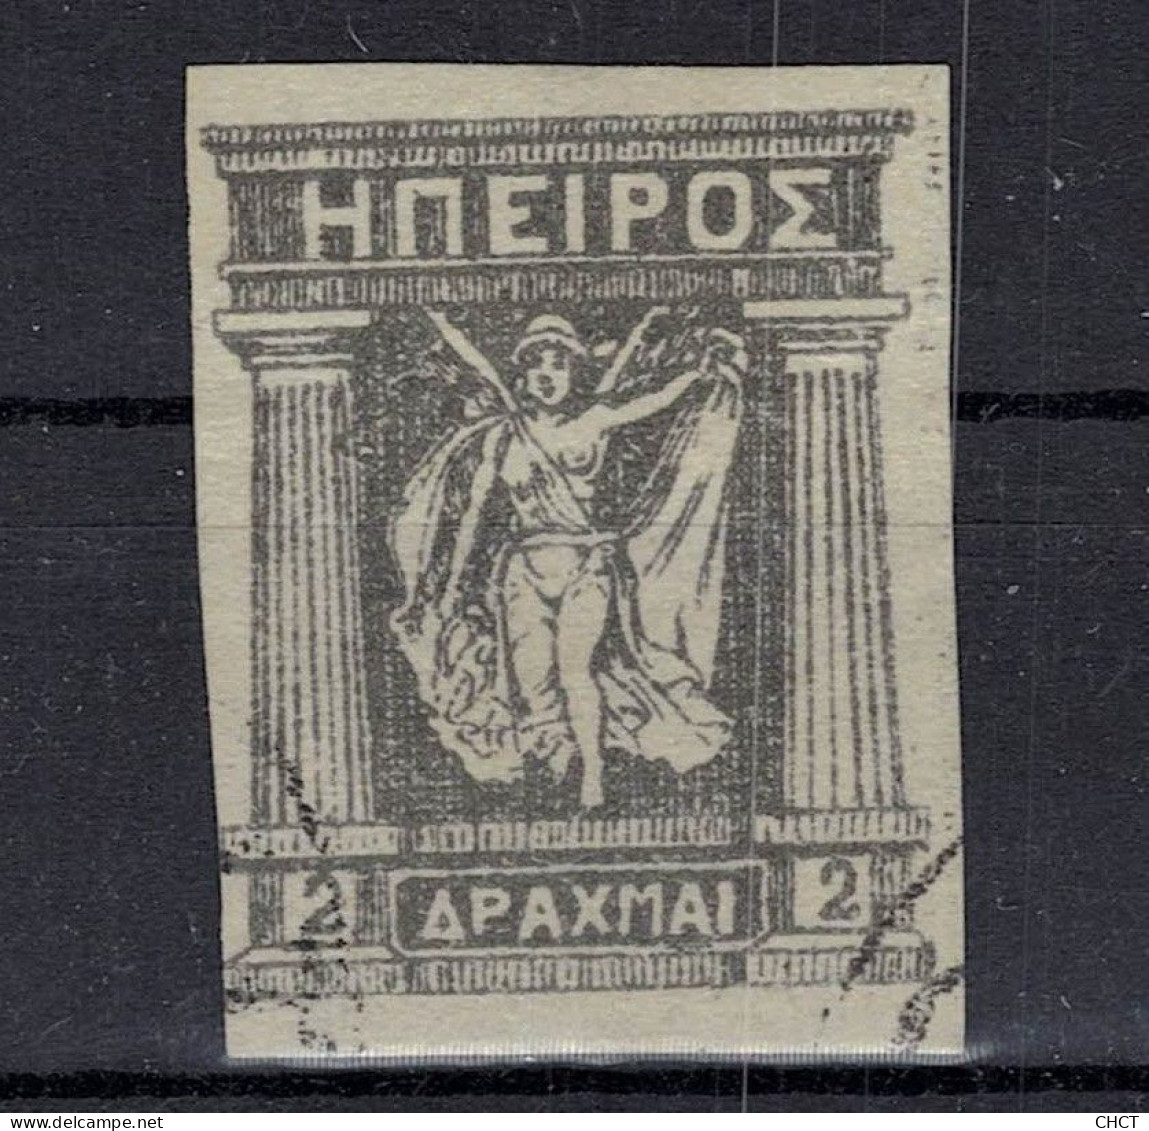 DHCT14 - 2 Drachmai, 1914, EPIRUS, Greece - Local Post Stamps